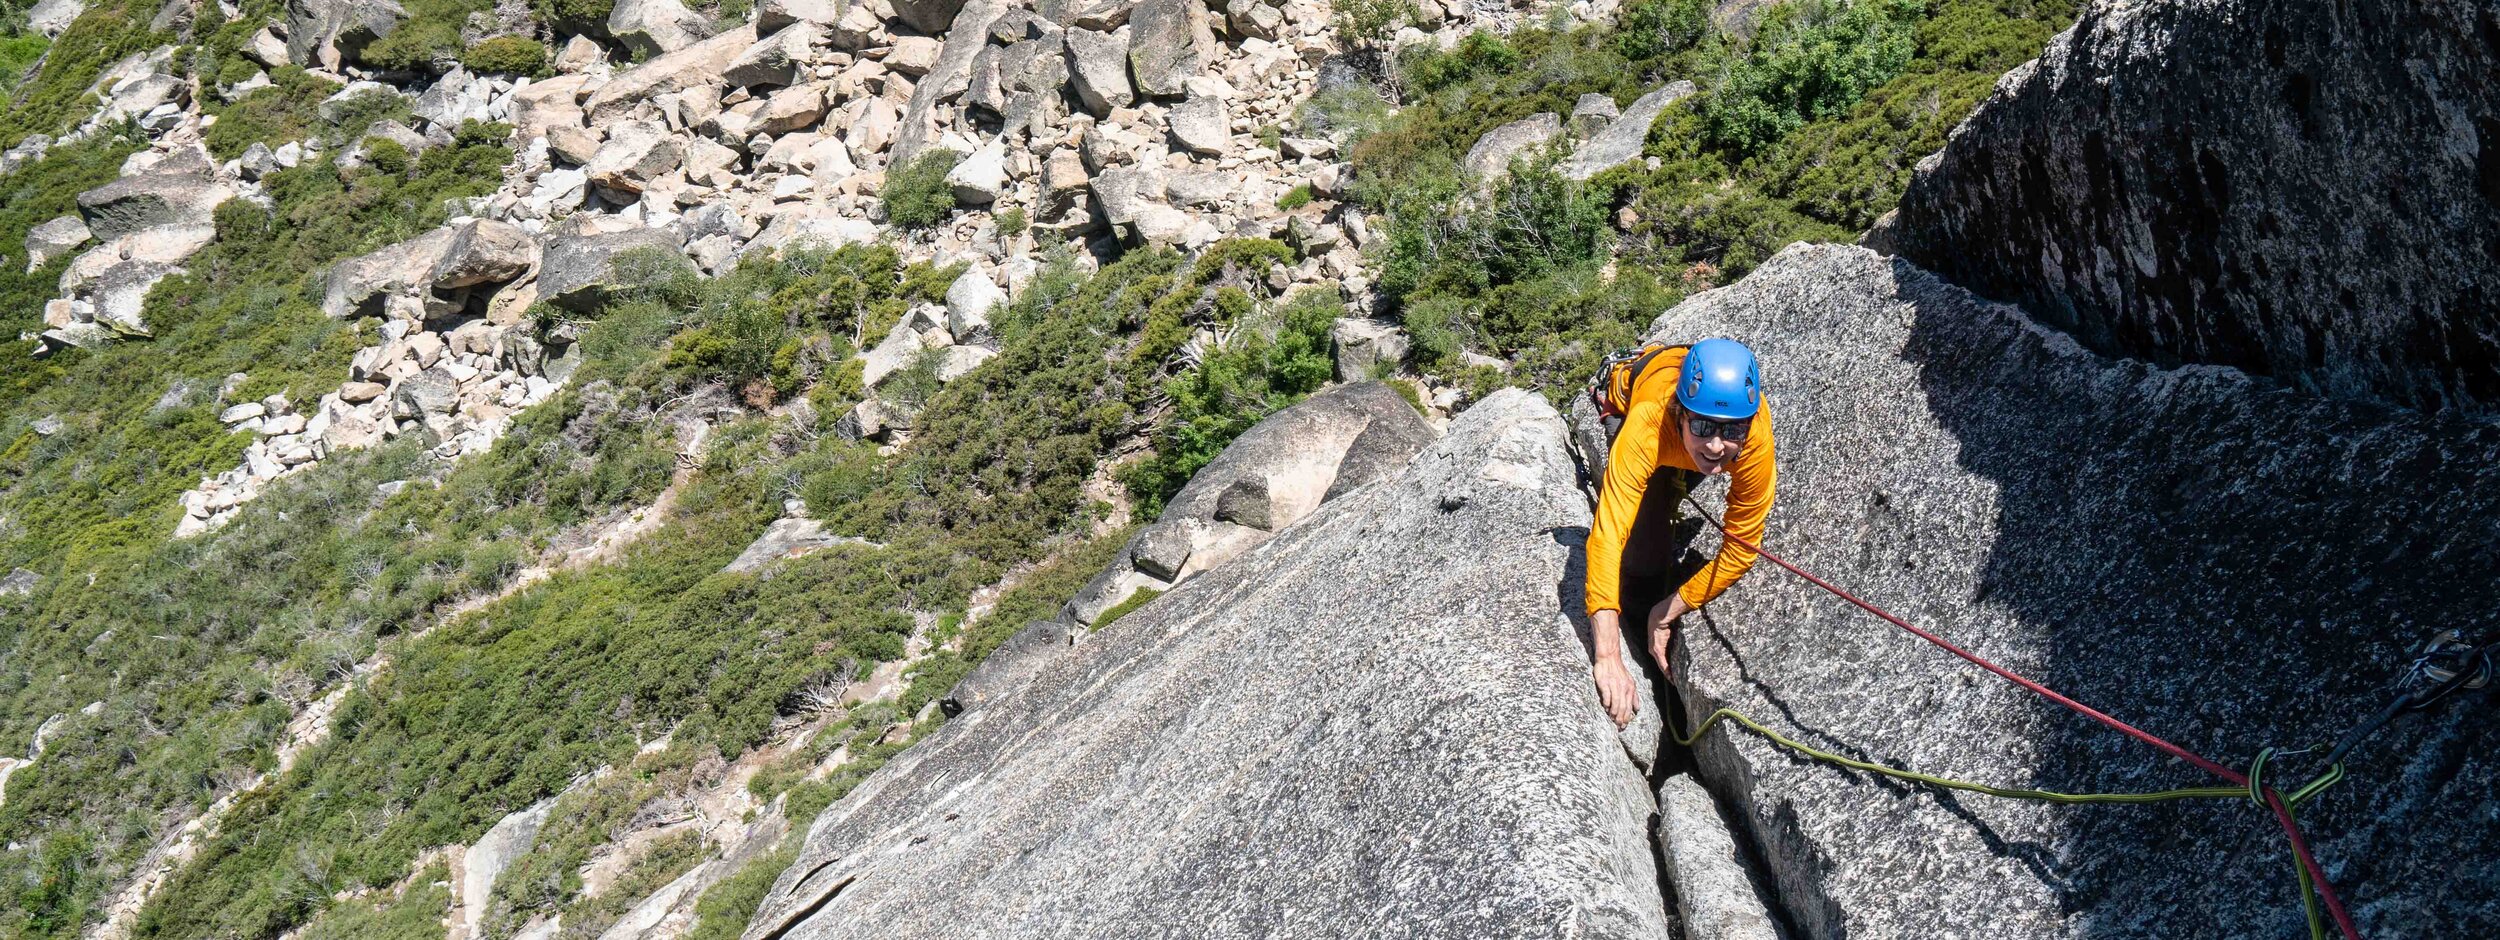 Private guided rock climbing at Lover's Leap — International Alpine Guides